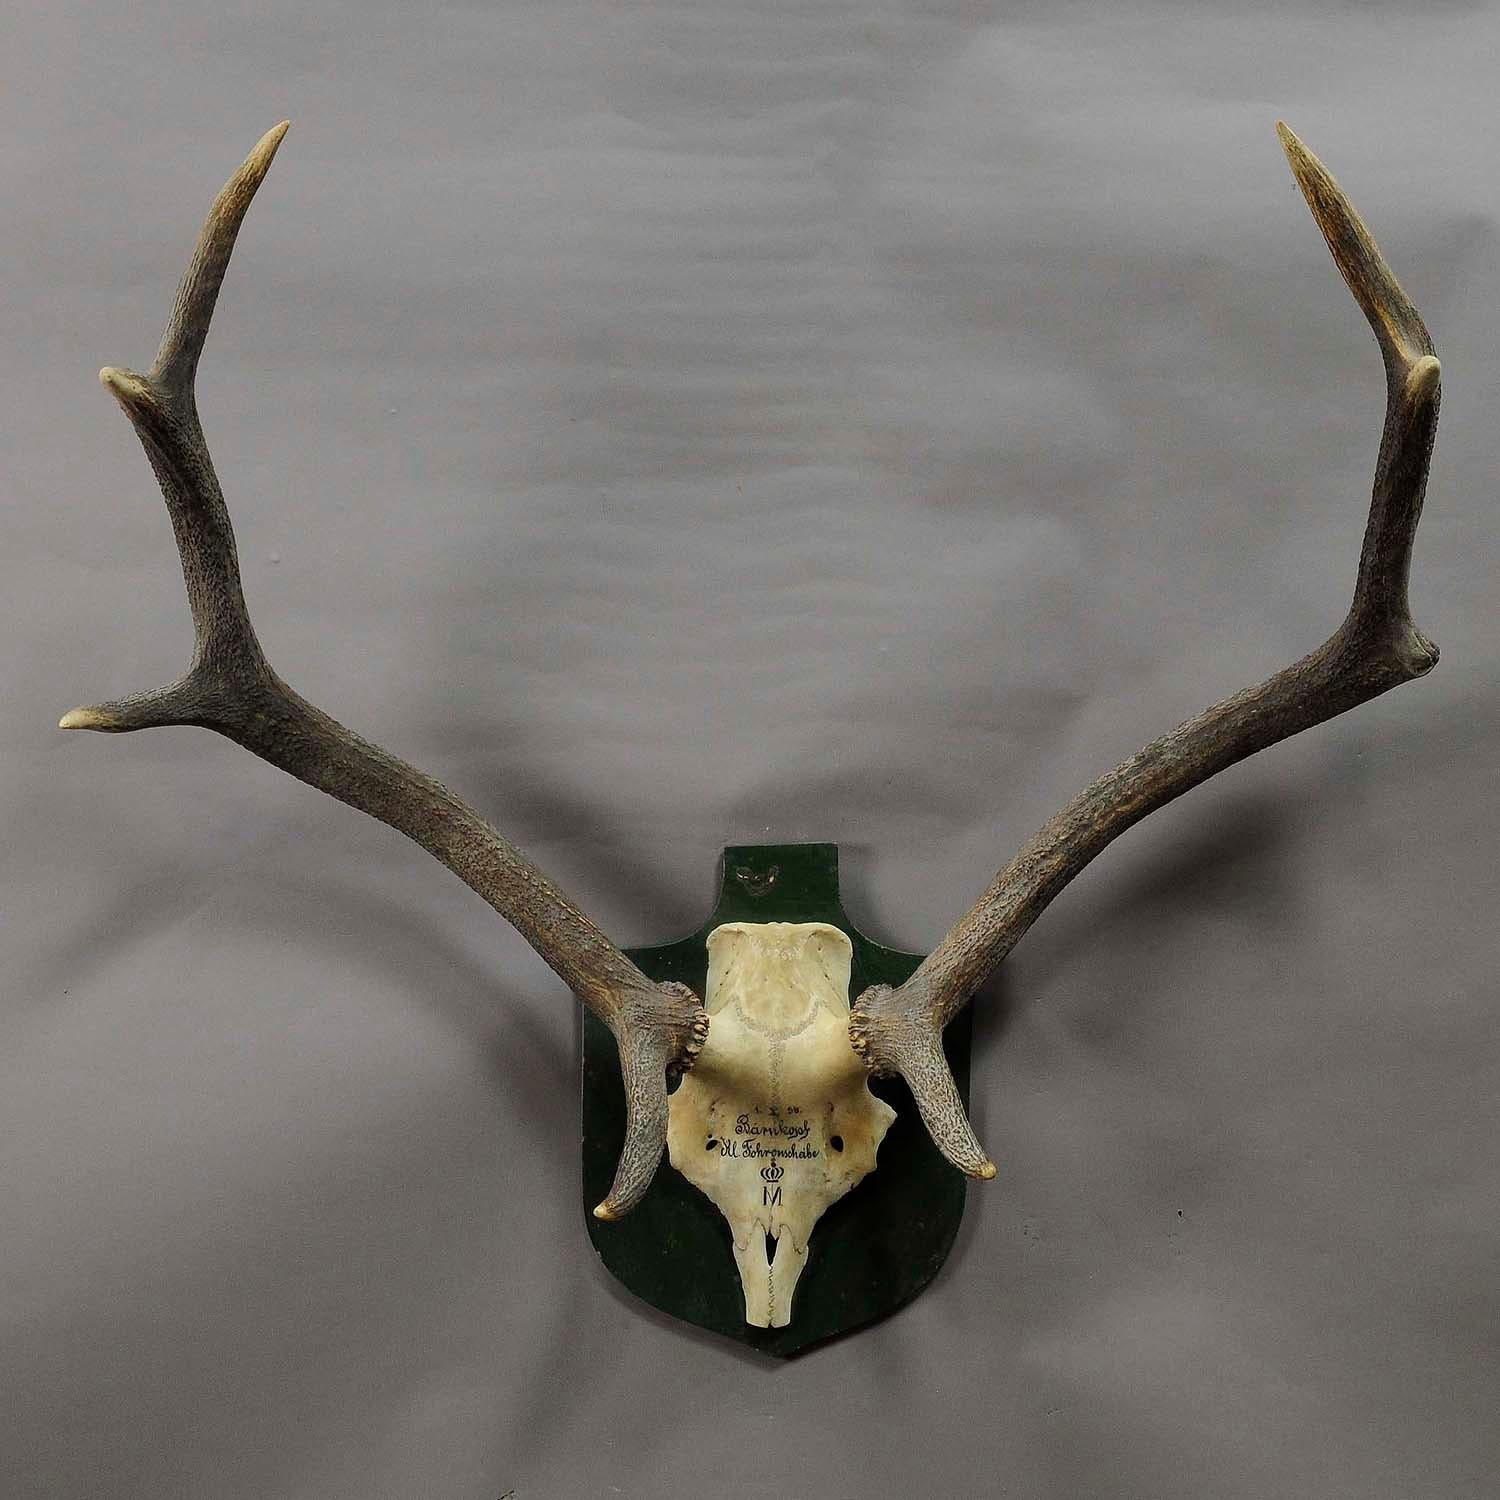 A great 8 pointer black forest deer trophy from the palace of Salem in south Germany. Shoot by a member of the lordly family of Badenin, 1956. Handwritten inscriptions on the skull with, place of the hunt, family crest and date 1956. Mounted on a